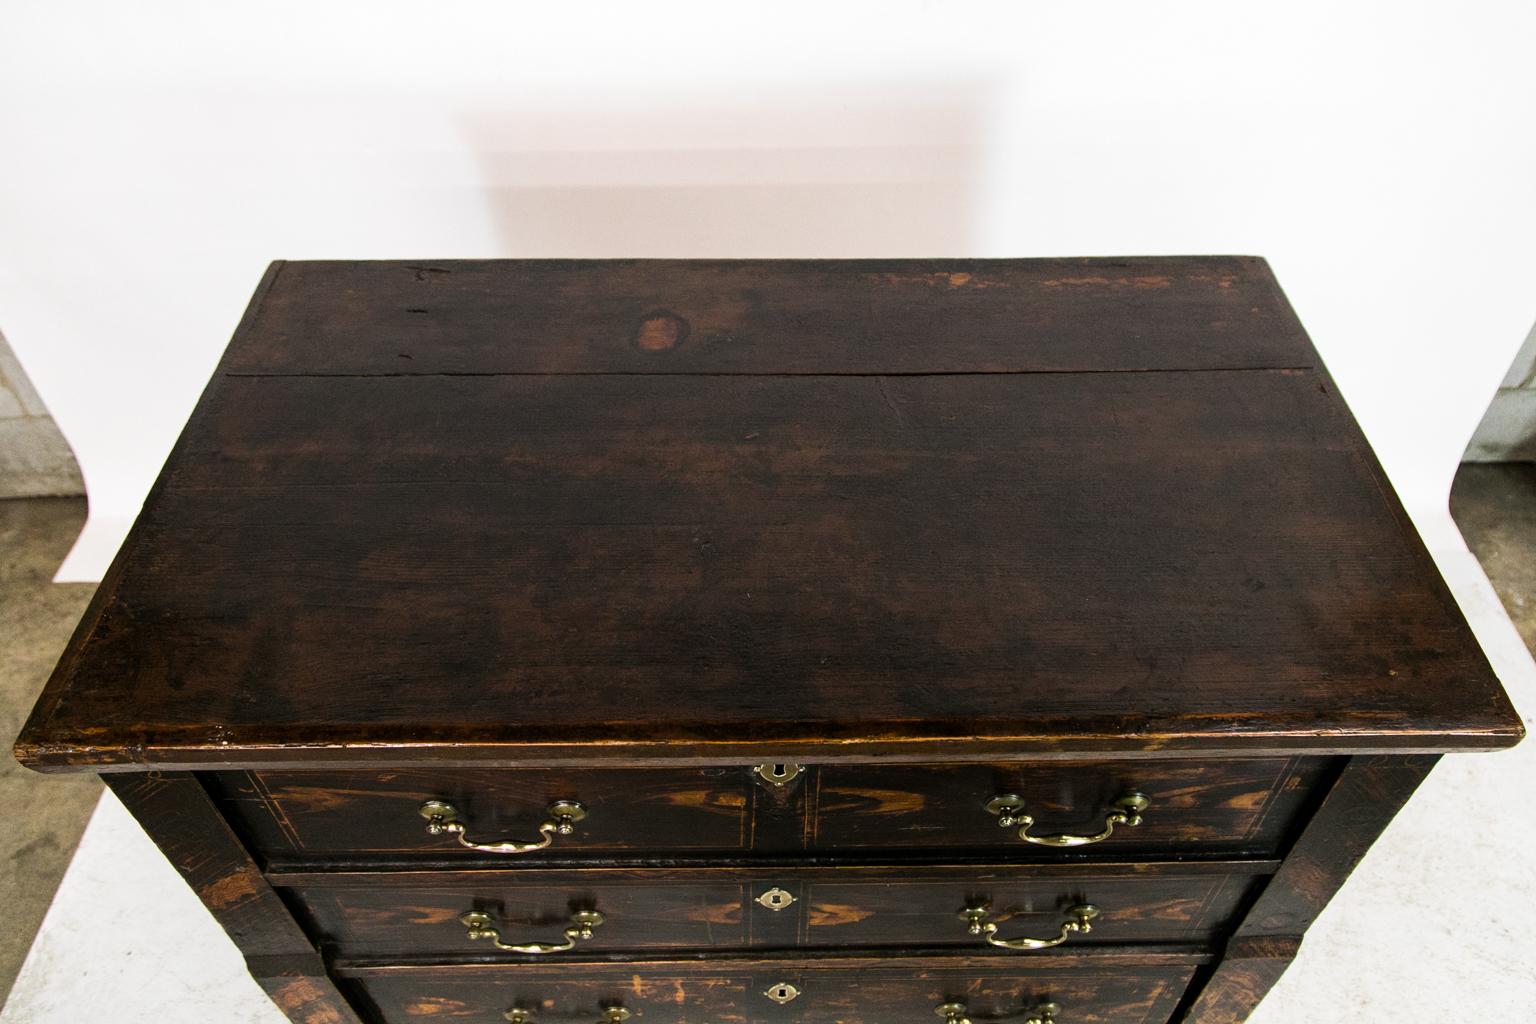 This Central European faux painted chest has a lift top with an old shrinkage crack that has had four later batten braces applied to arrest further shrinkage. There is a lift top on the left inside top. The chest has the original forged steel lock.